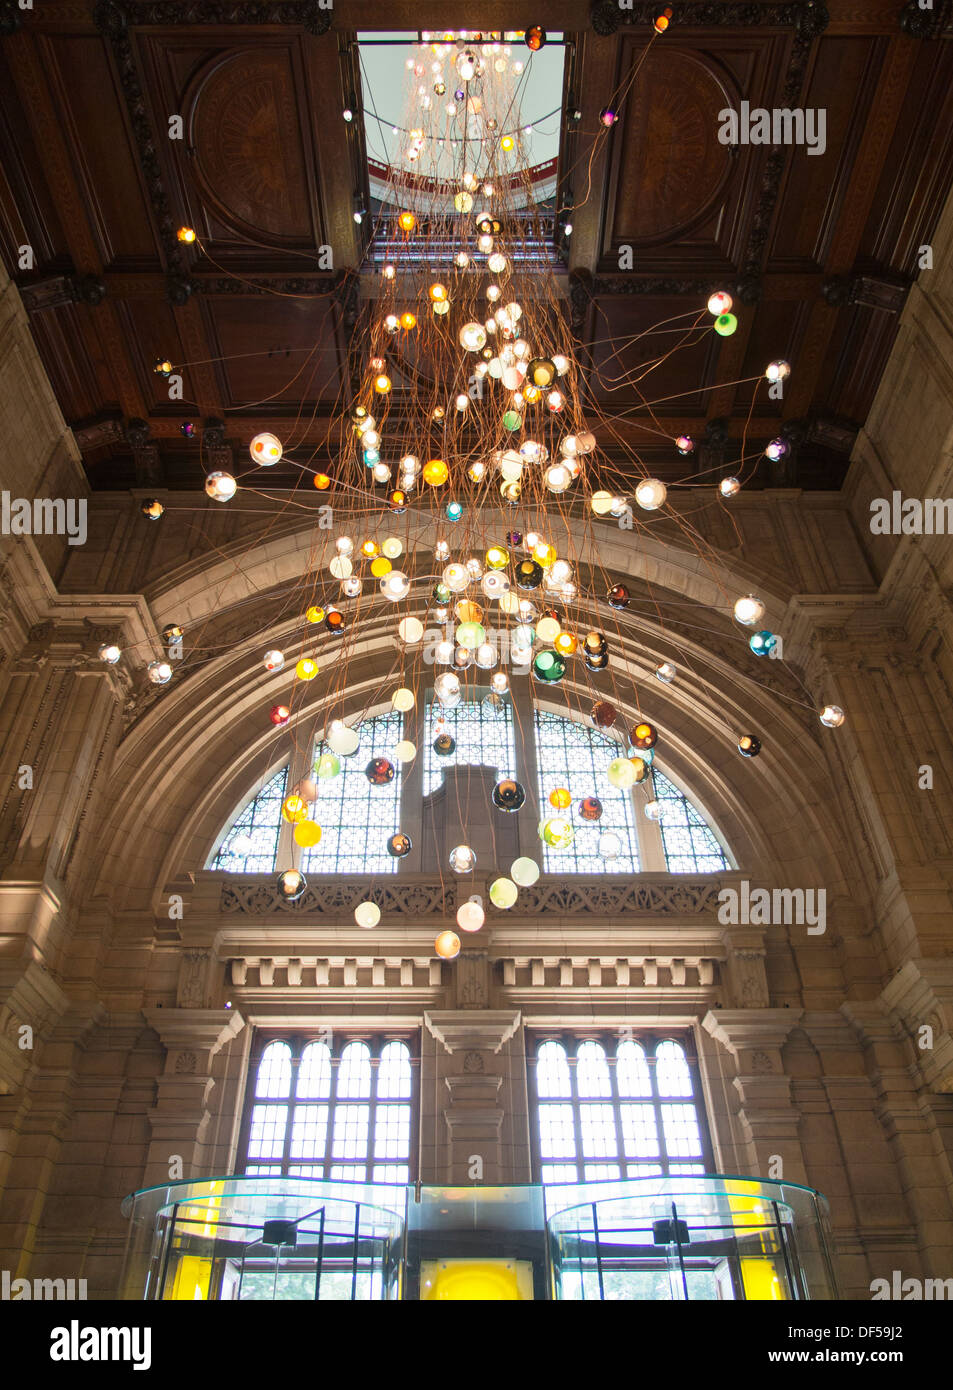 The Victoria and Albert Museum, London - new hanging lights sculpture in the foyer 3 Stock Photo